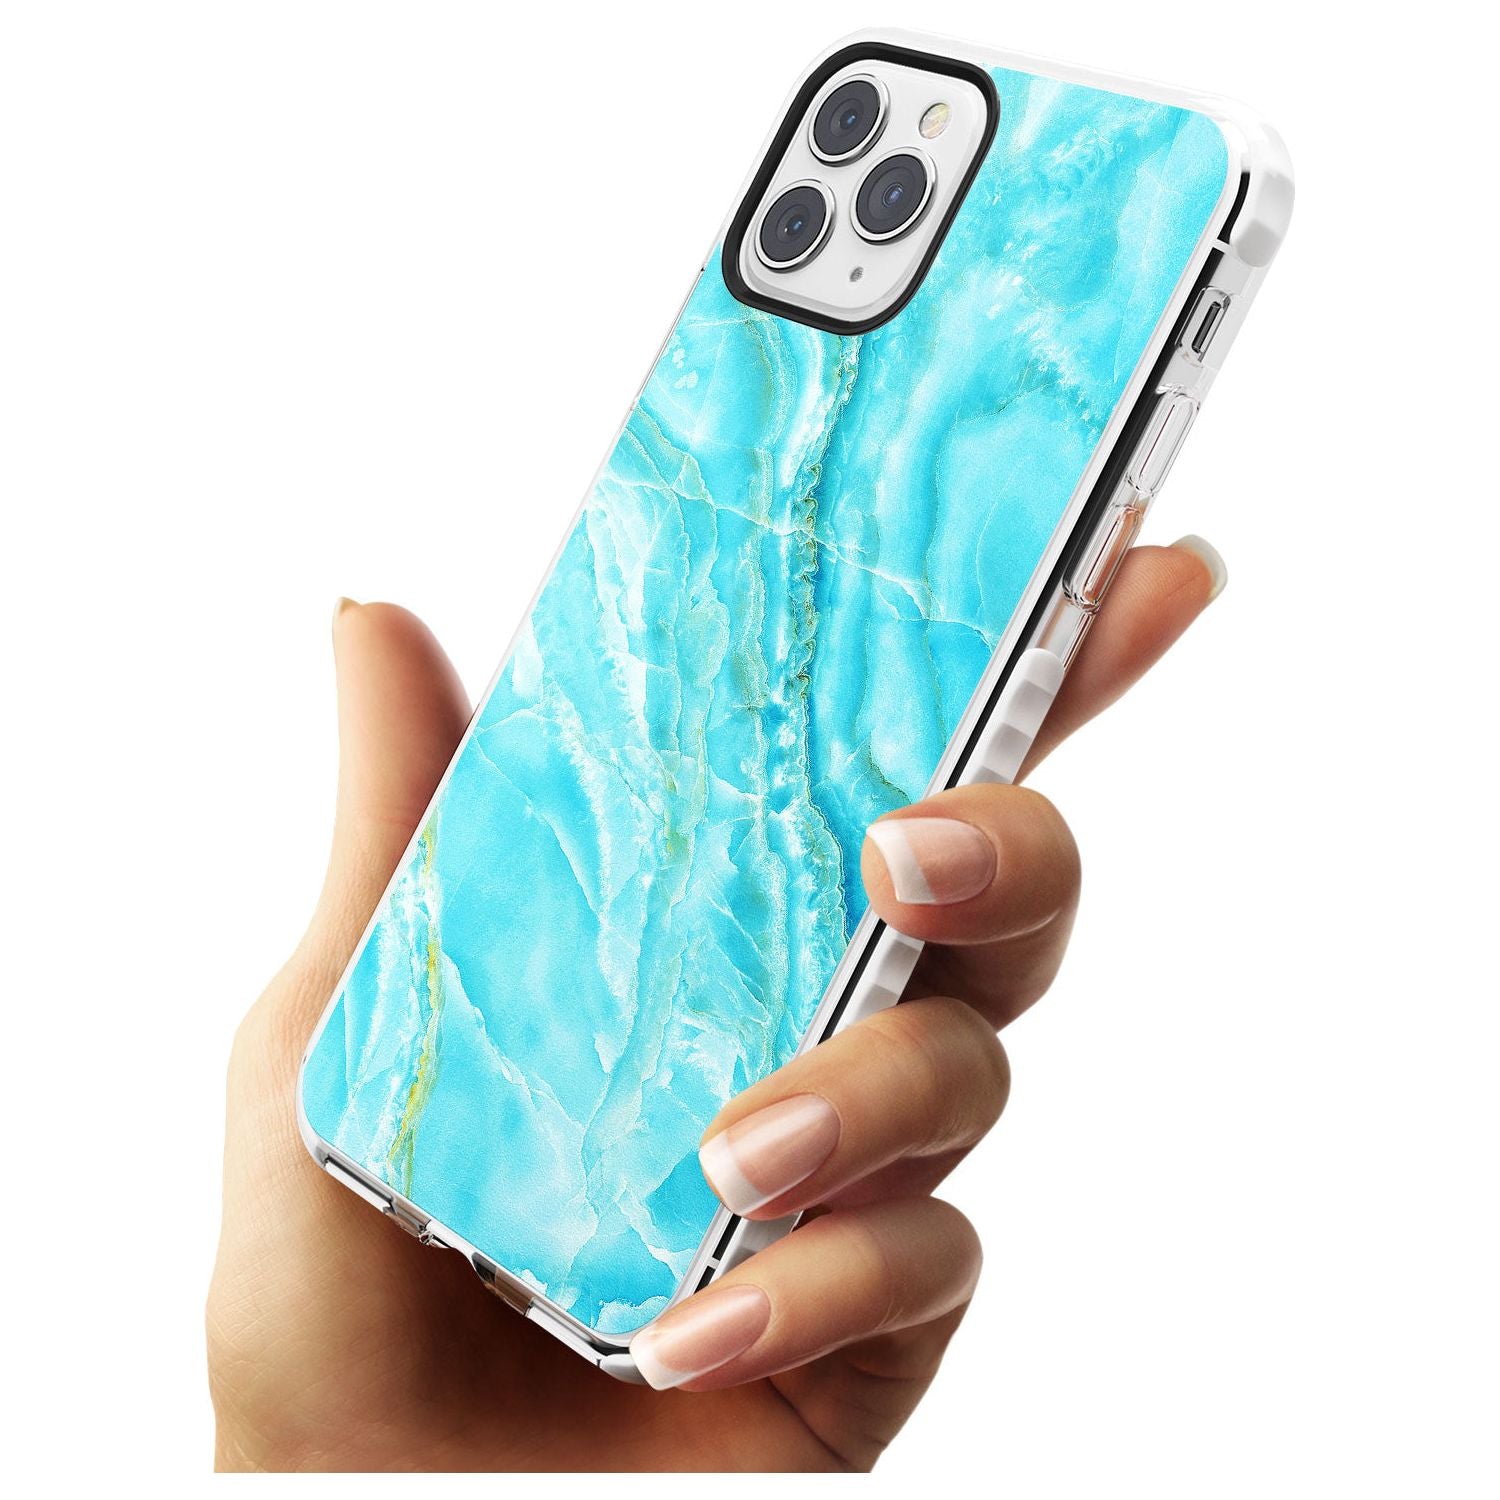 Bright Blue Onyx Marble Texture Slim TPU Phone Case for iPhone 11 Pro Max